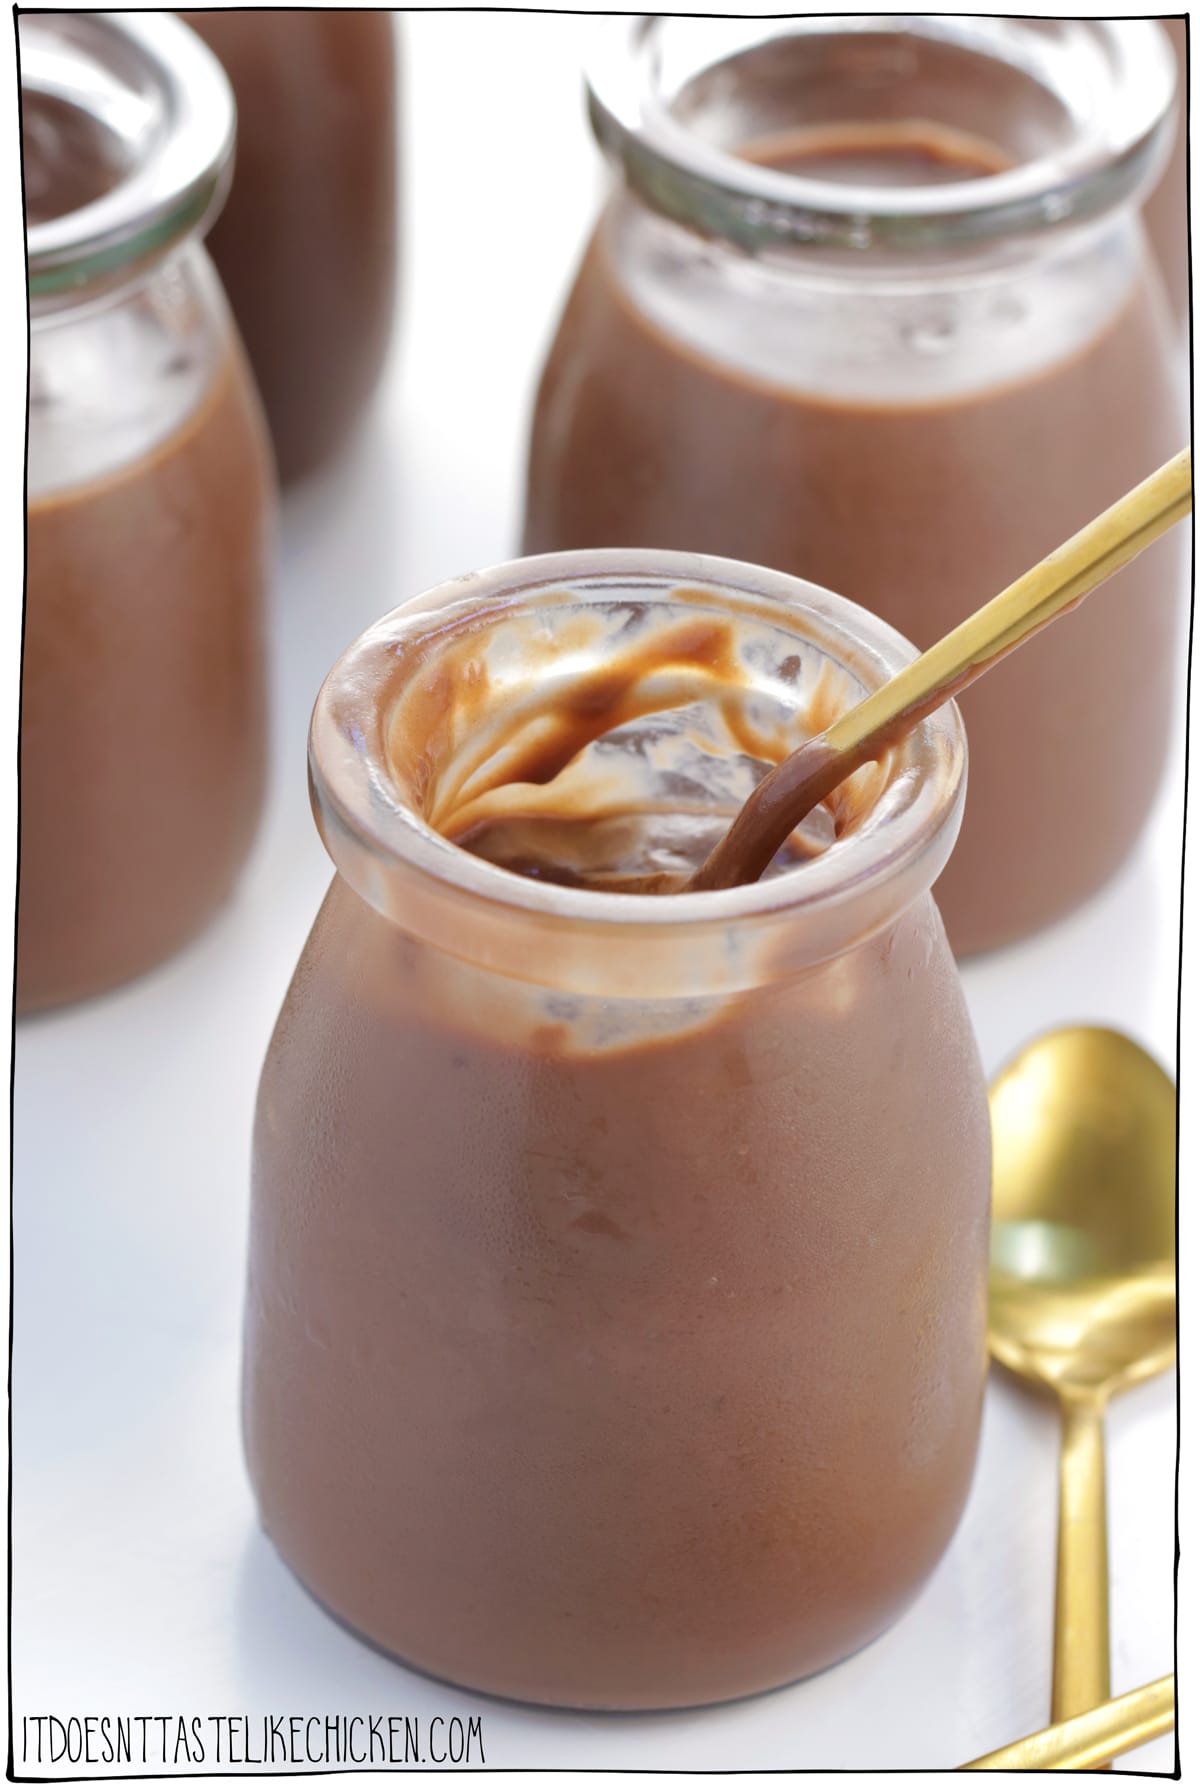 Easy Vegan Chocolate Pudding! Just 6 ingredients and 10 minutes to make. Super creamy chocolatey delicious, it's 20 thousand times better than those store-bought cups. The perfect addition to your school or work lunchbox, or for an easy dessert or snack! #itdoesnttastelikechicken #veganrecipes #vegankid #vegandessert